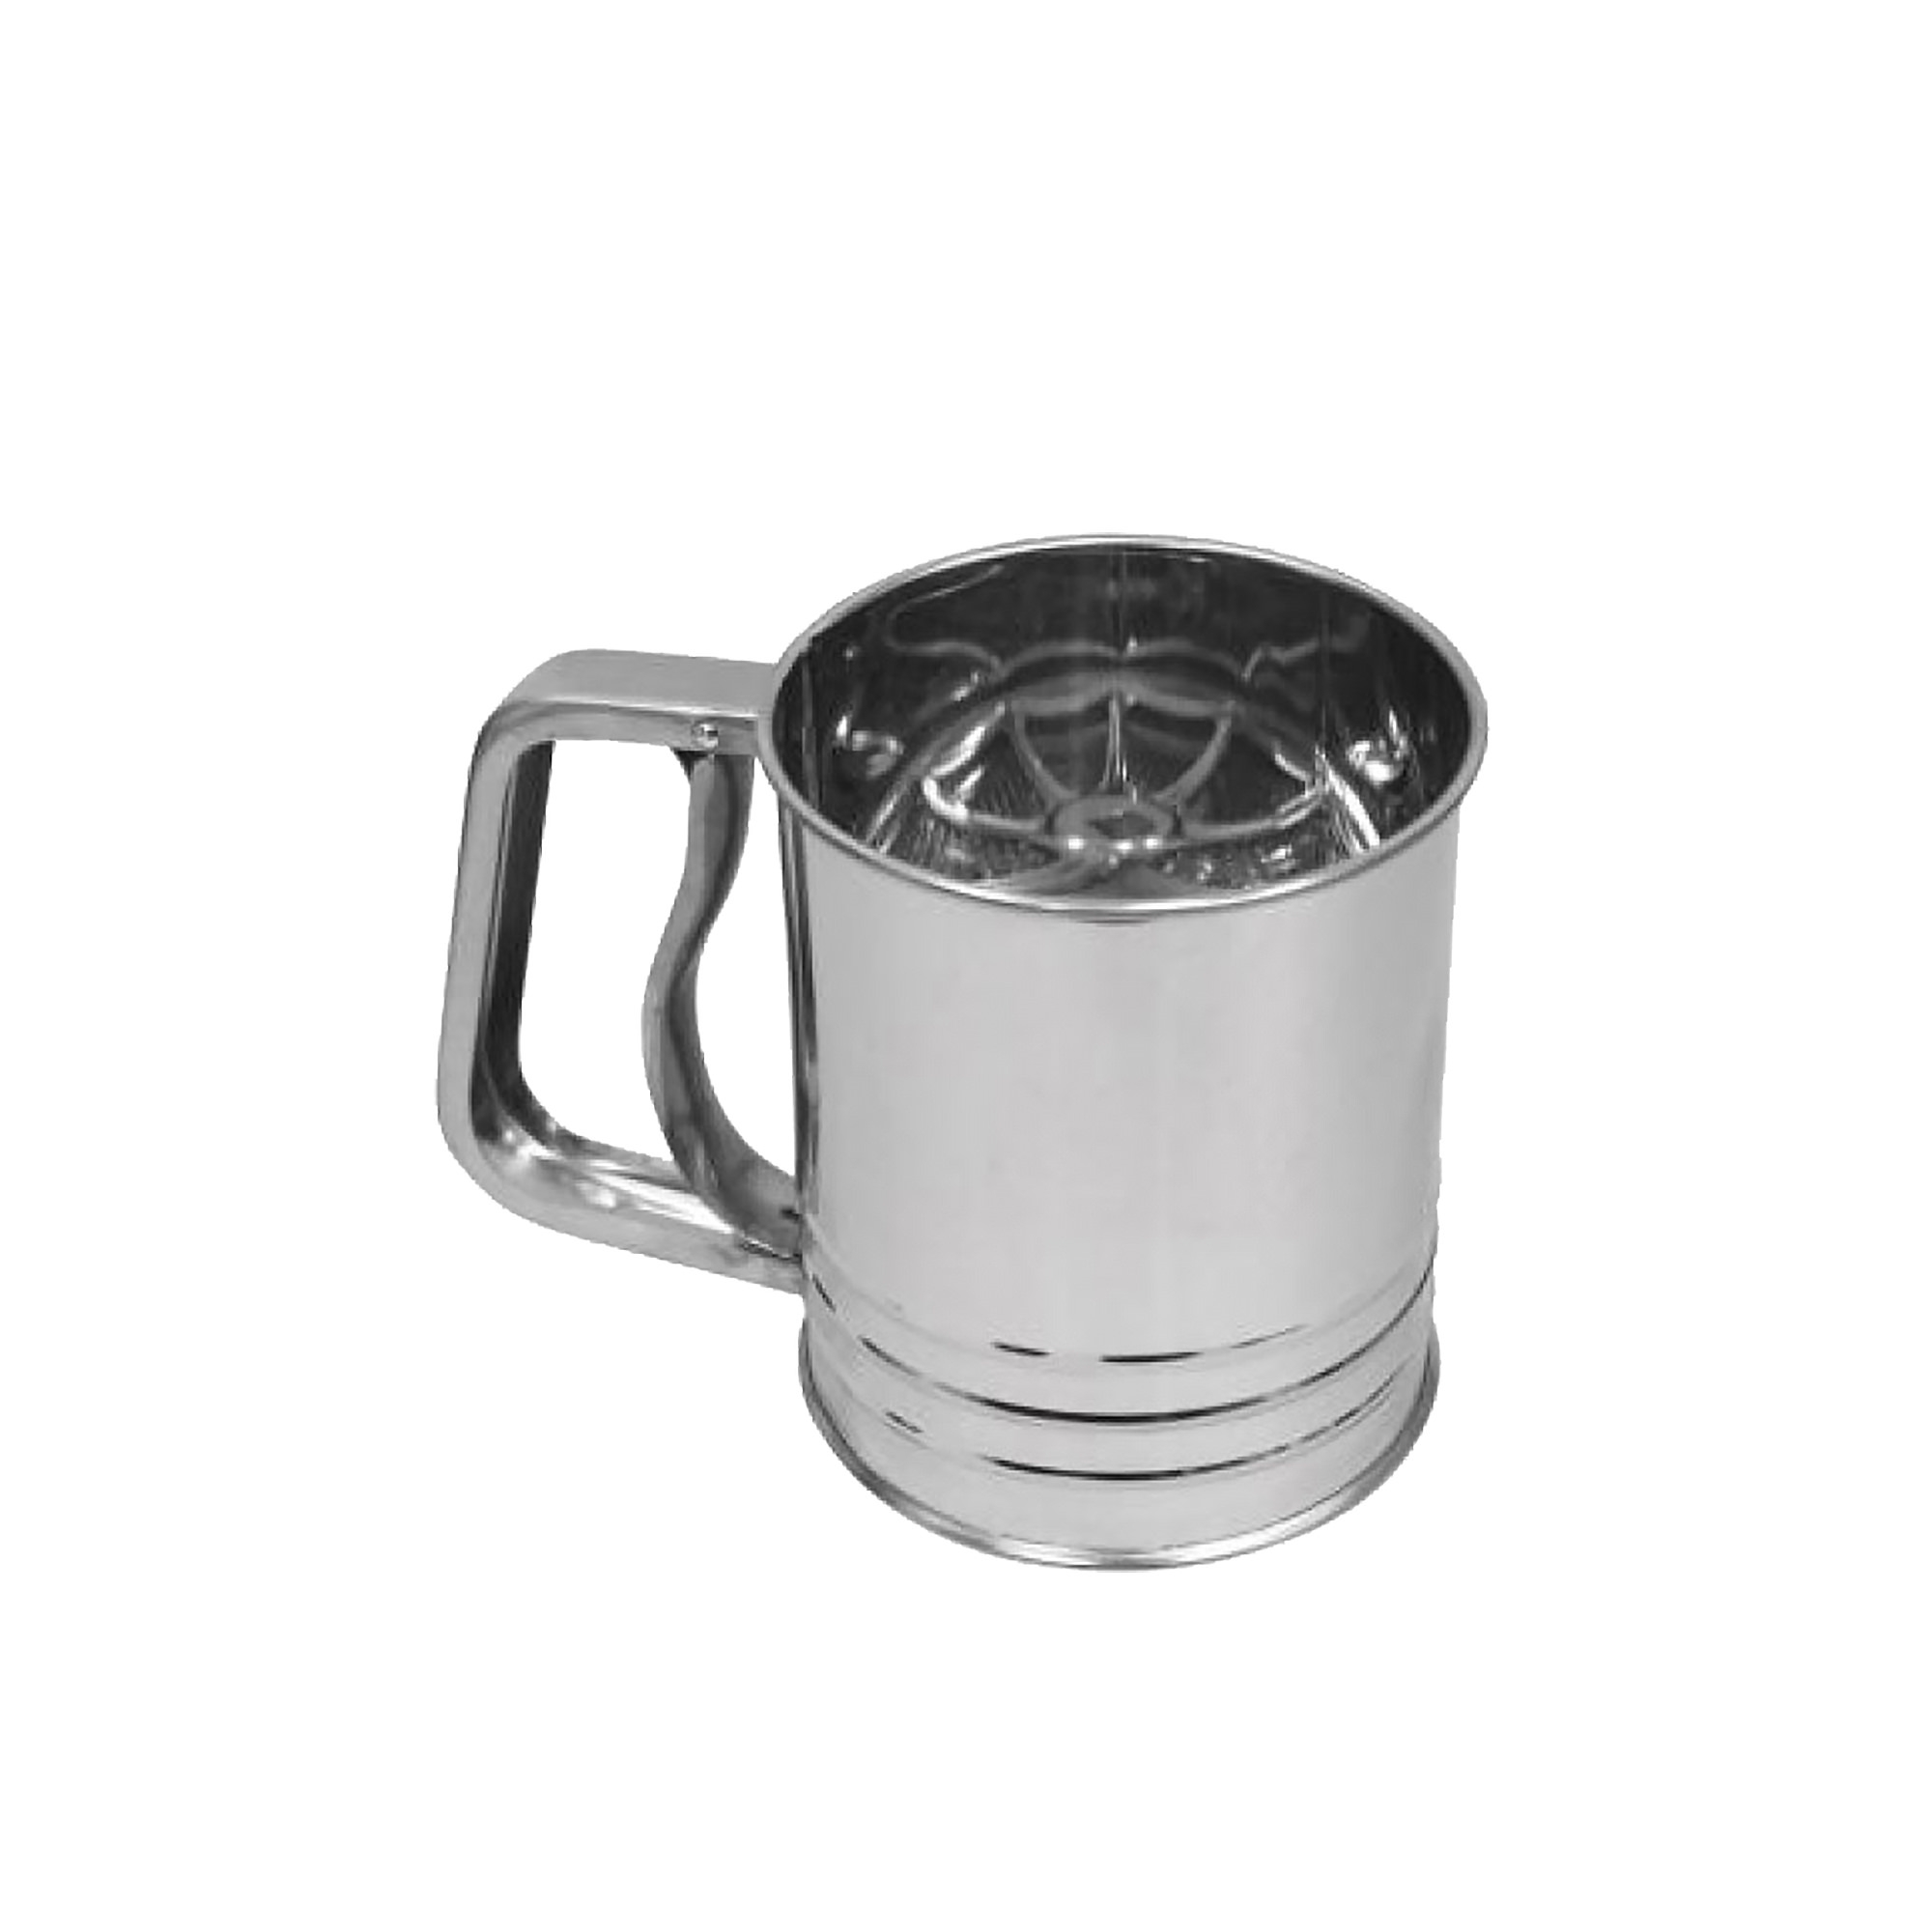 Loyal Flour Sifter 3 Cups Image 1